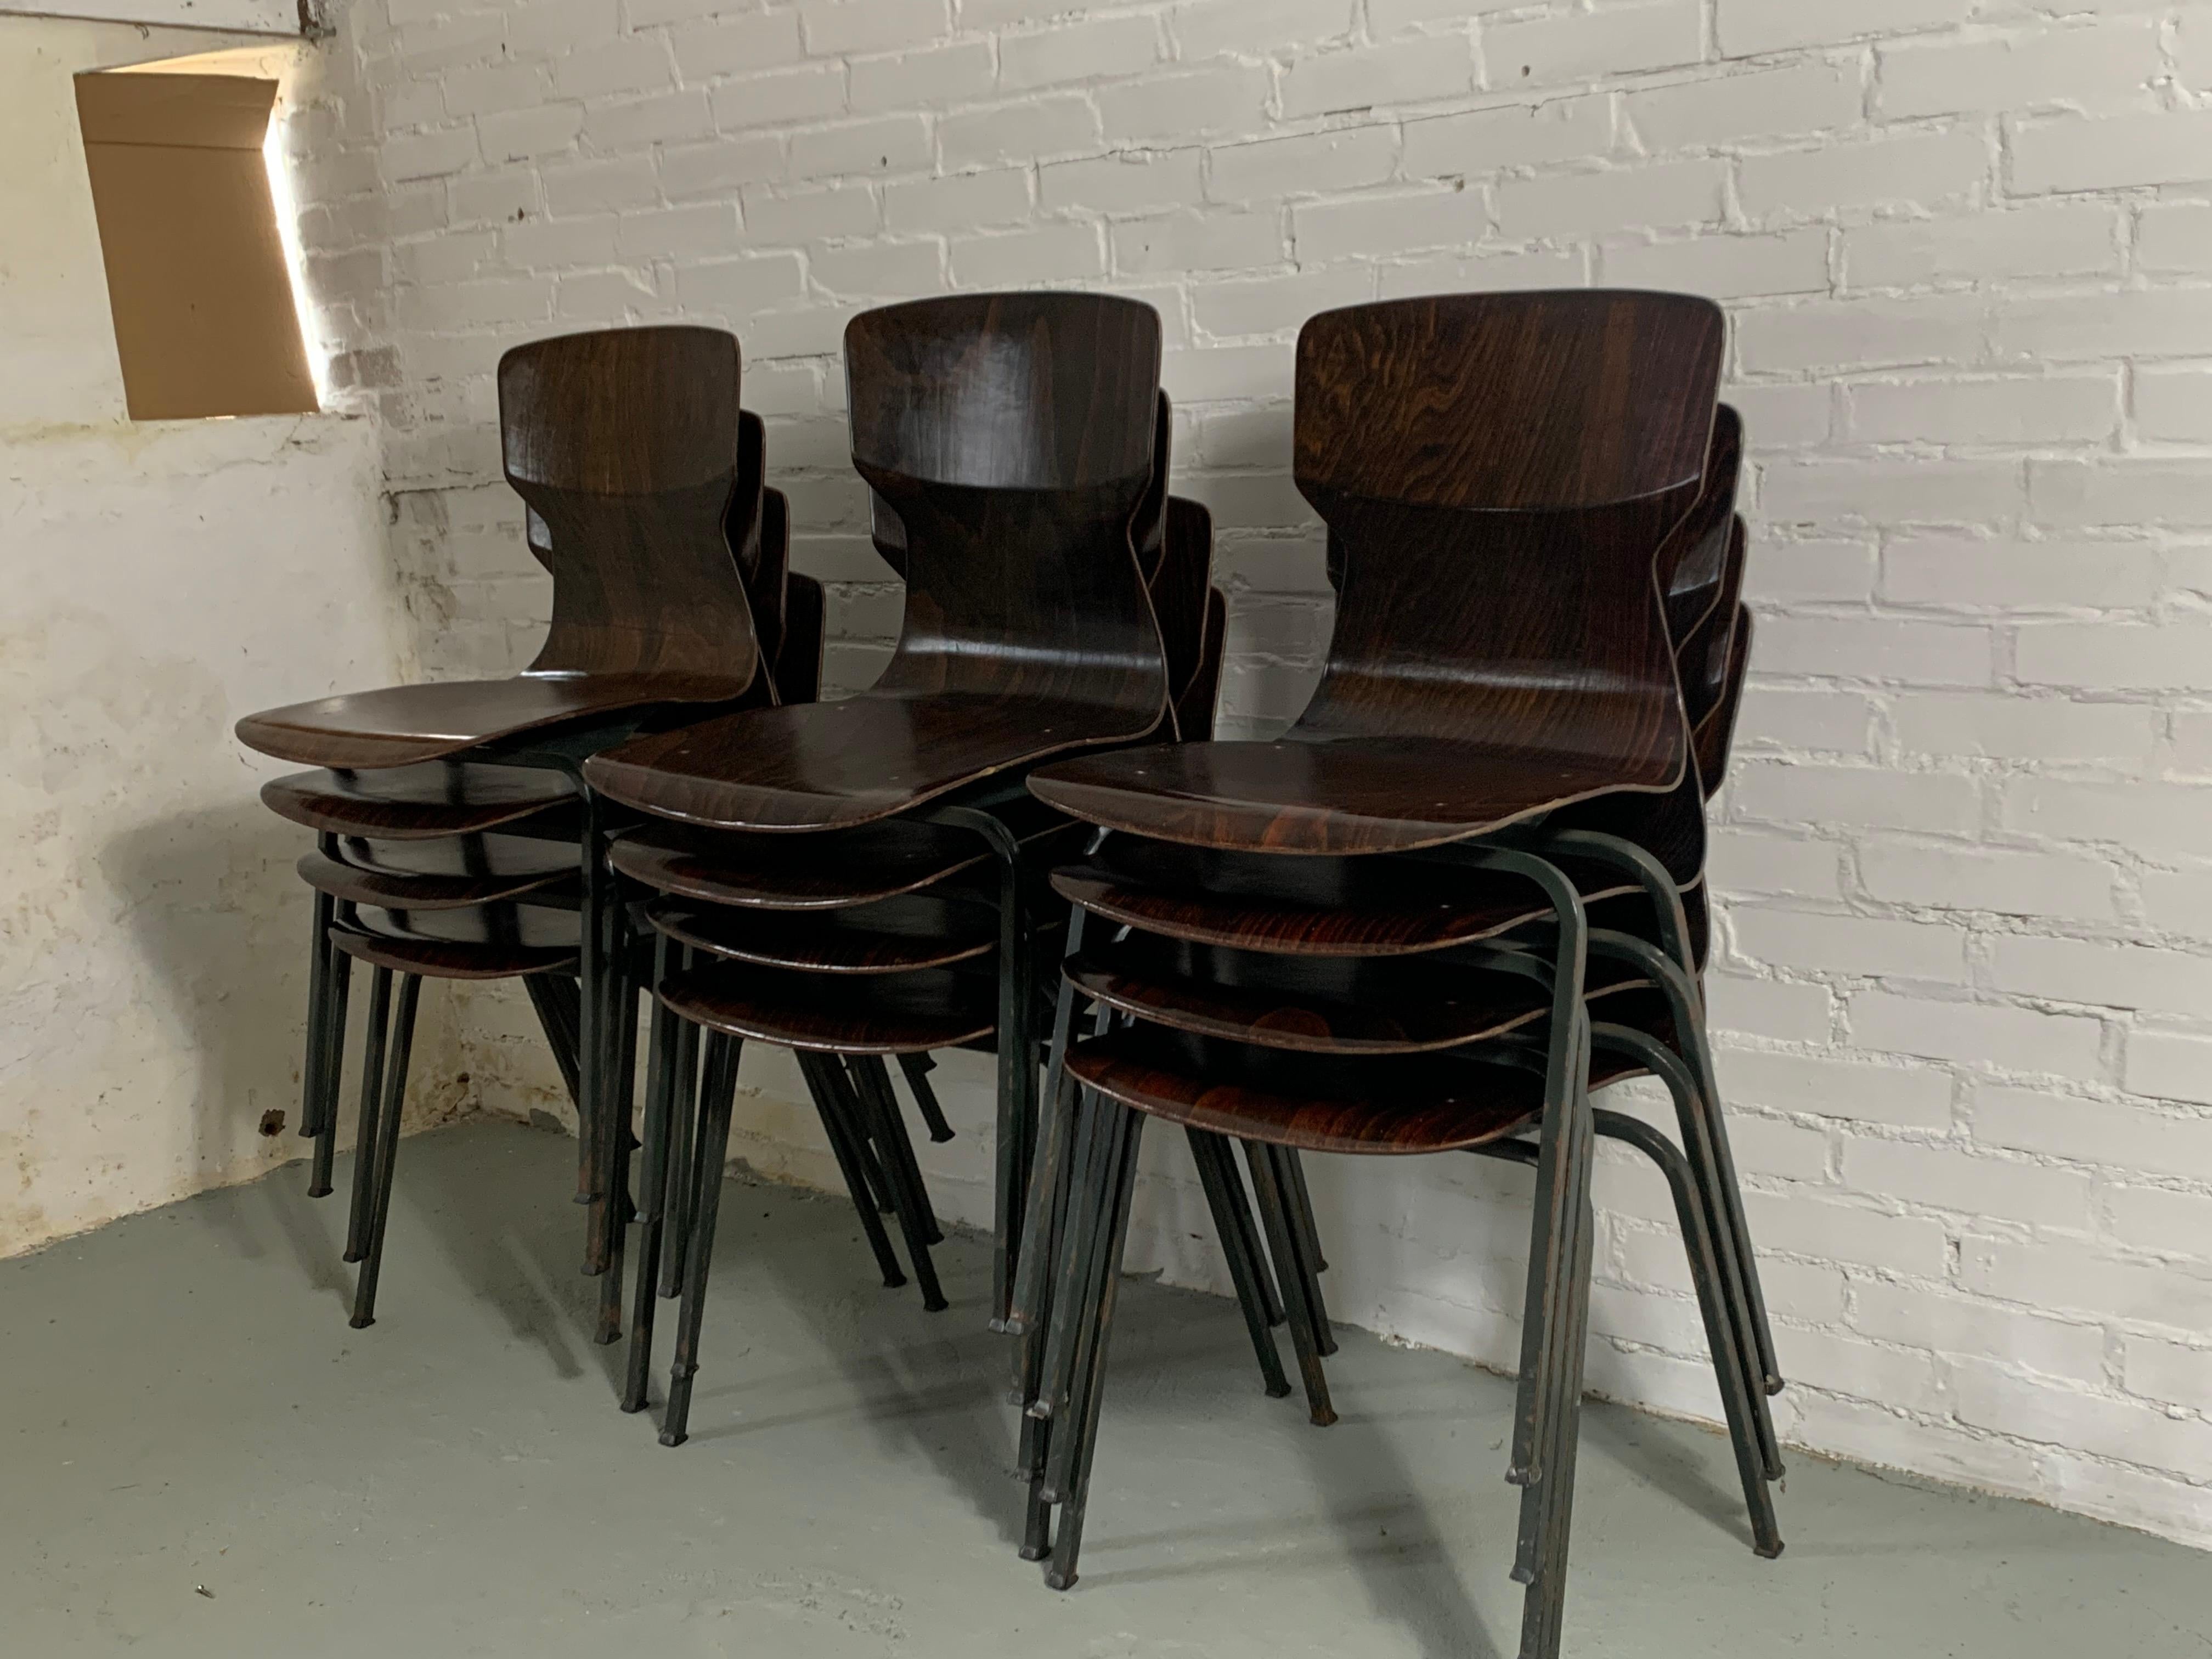 20th Century Pagwood Eromes Chairs 15 Available 6